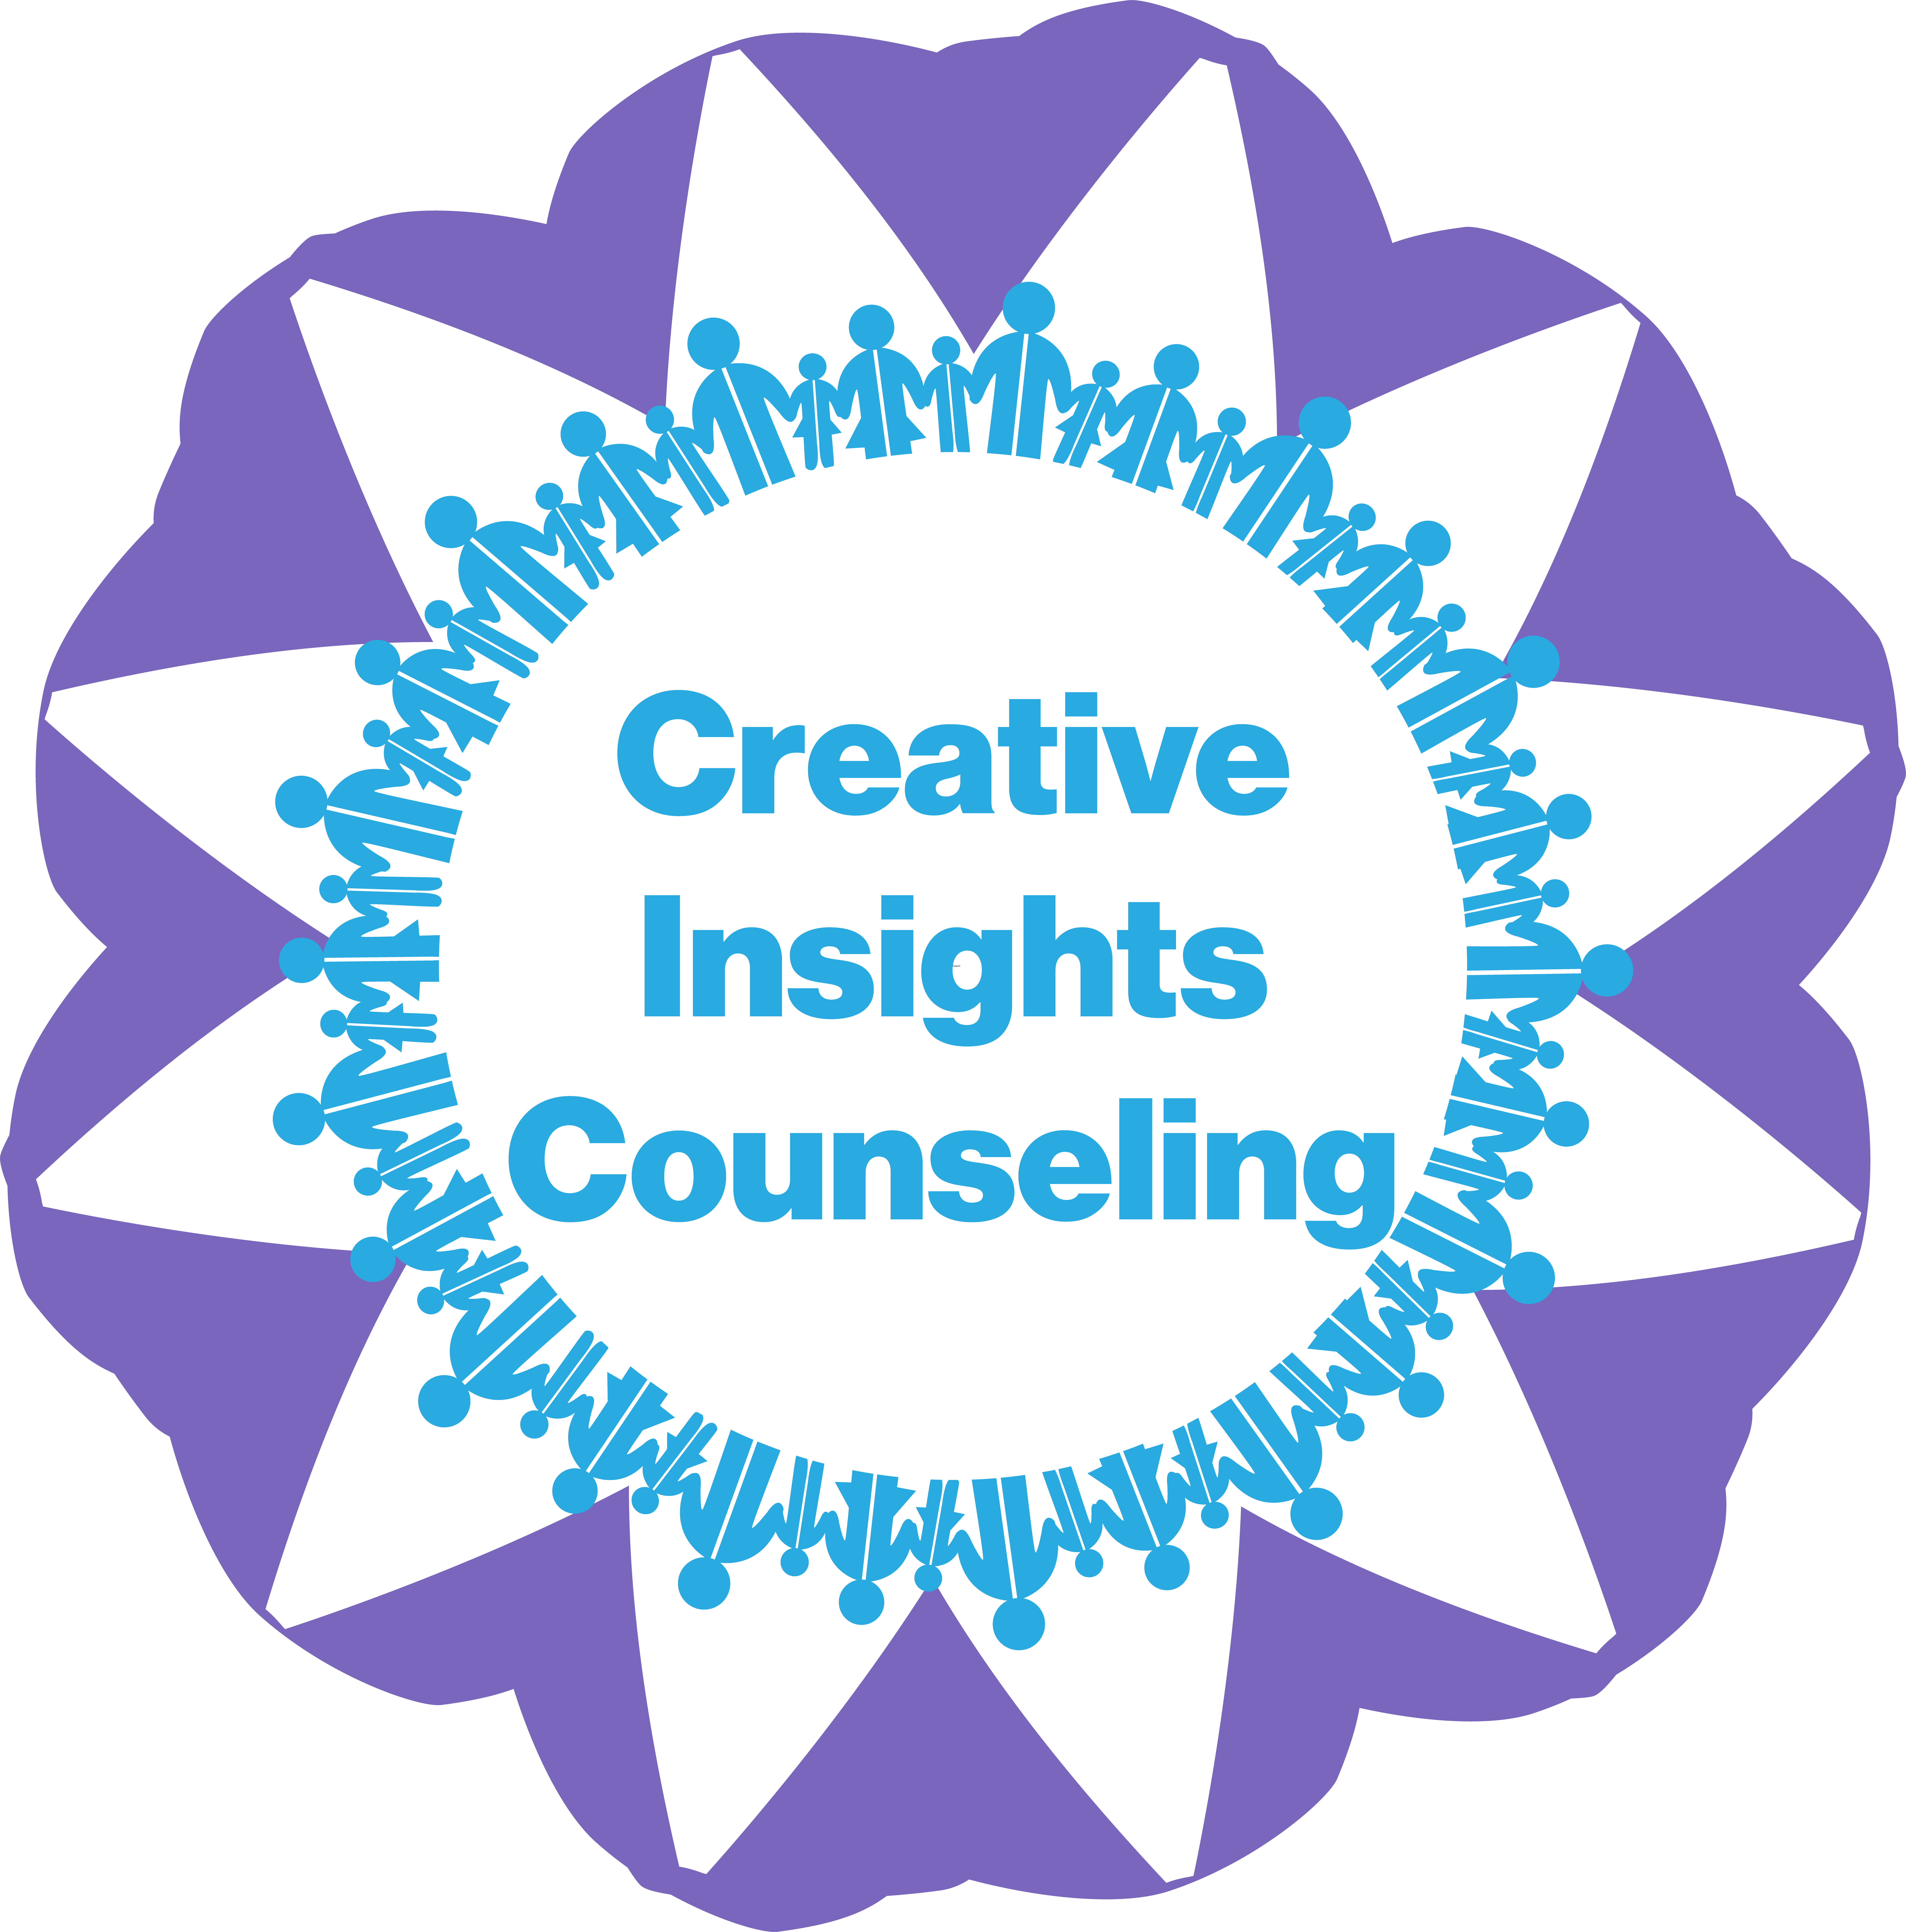 Creative Insights Counseling